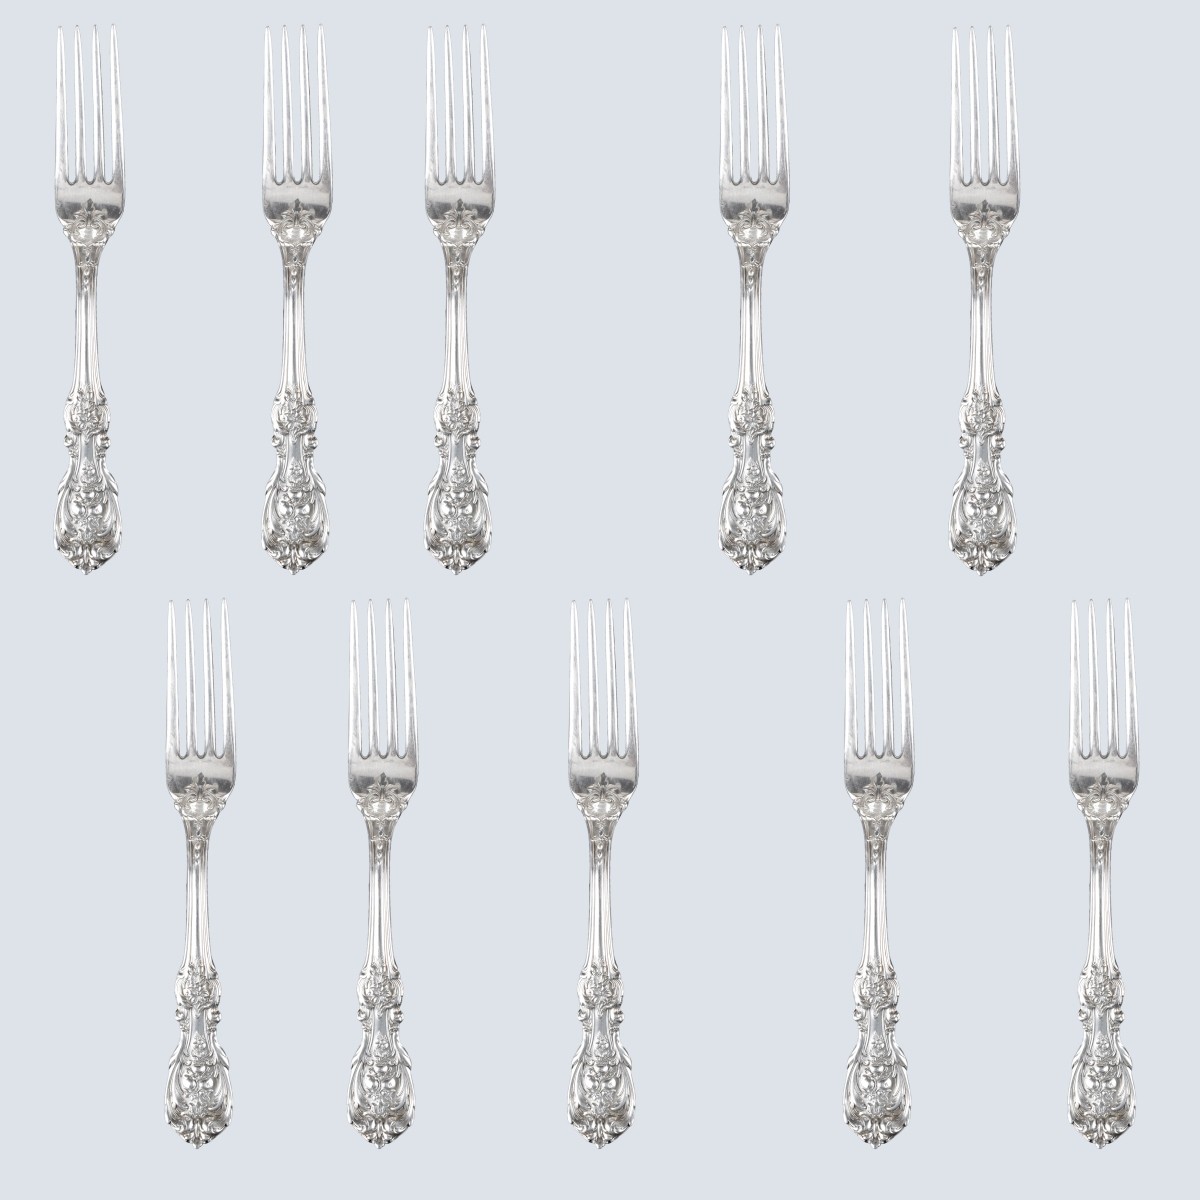 Reed & Barton "Francis I" Sterling Silver Forks